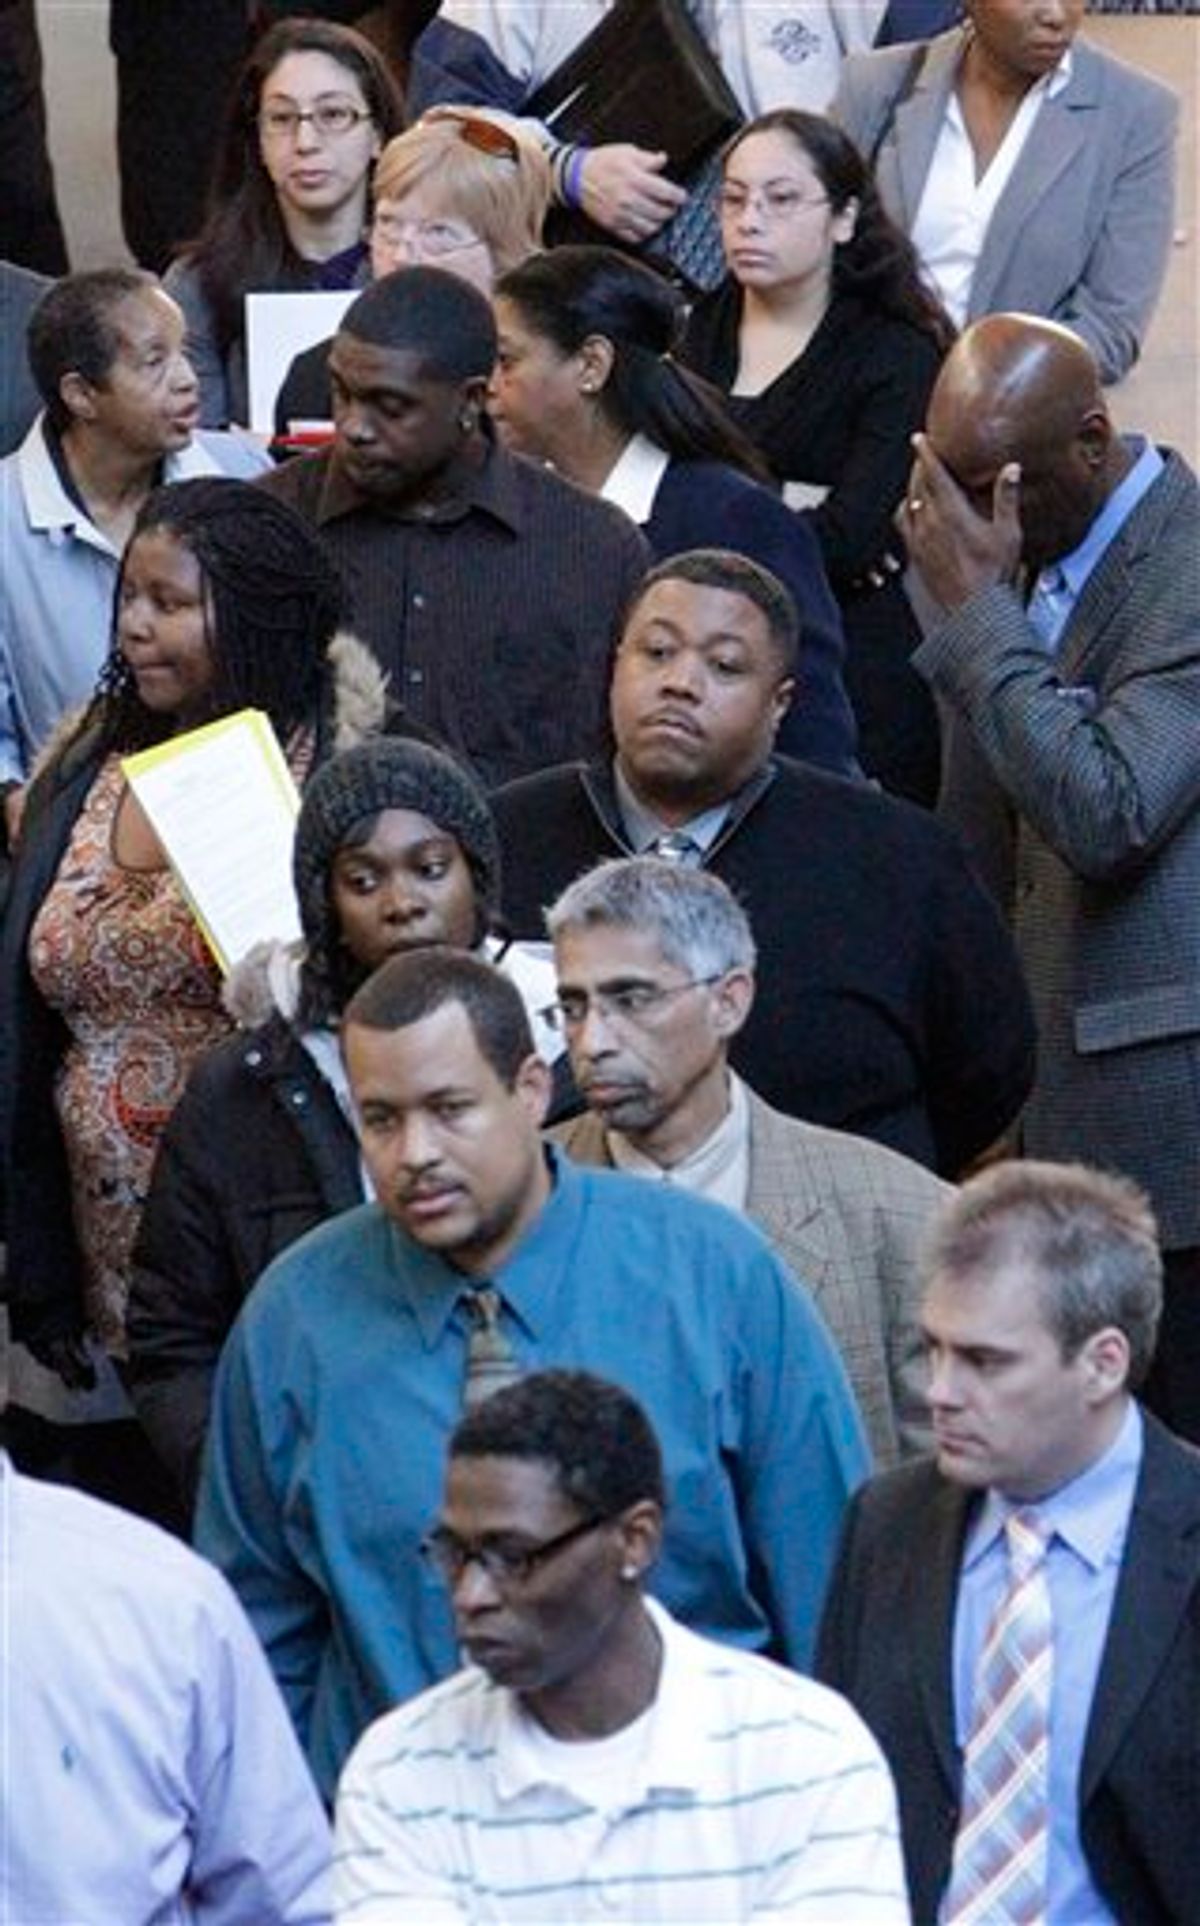 FILE - In this Jan. 26, 2011 file photo, job seekers line up for a job fair at a hotel in Dallas. The number of people applying for unemployment benefits fell last week, after bad weather contributed to a spike in the number of those seeking benefits the previous week. (AP Photo/LM Otero, file) (AP)